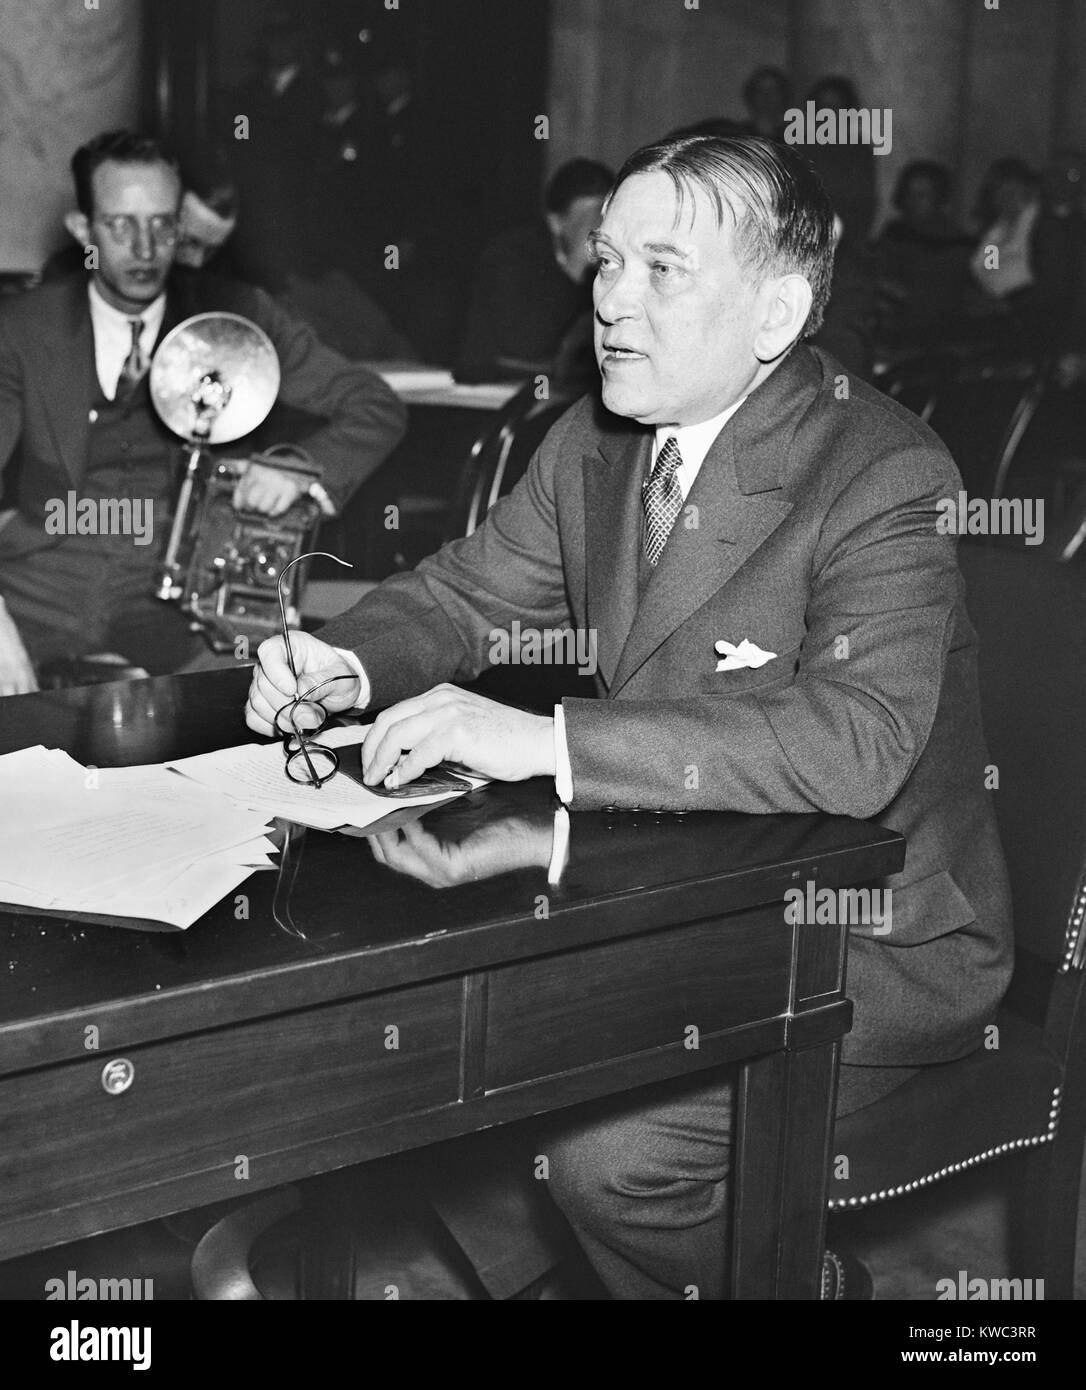 Henry Mencken testified, 'no civilized country can condone lynching,' on Feb. 2, 1935. The journalist and social critic was before the Senate Judiciary sub-committee hearing on the Anti-Lynching bill. Between 1920 and 1930 the House of Representative passed three strong bills, but each was blocked by the Senate's Southern Democratic voting block. (BSLOC 2015 14 180) Stock Photo